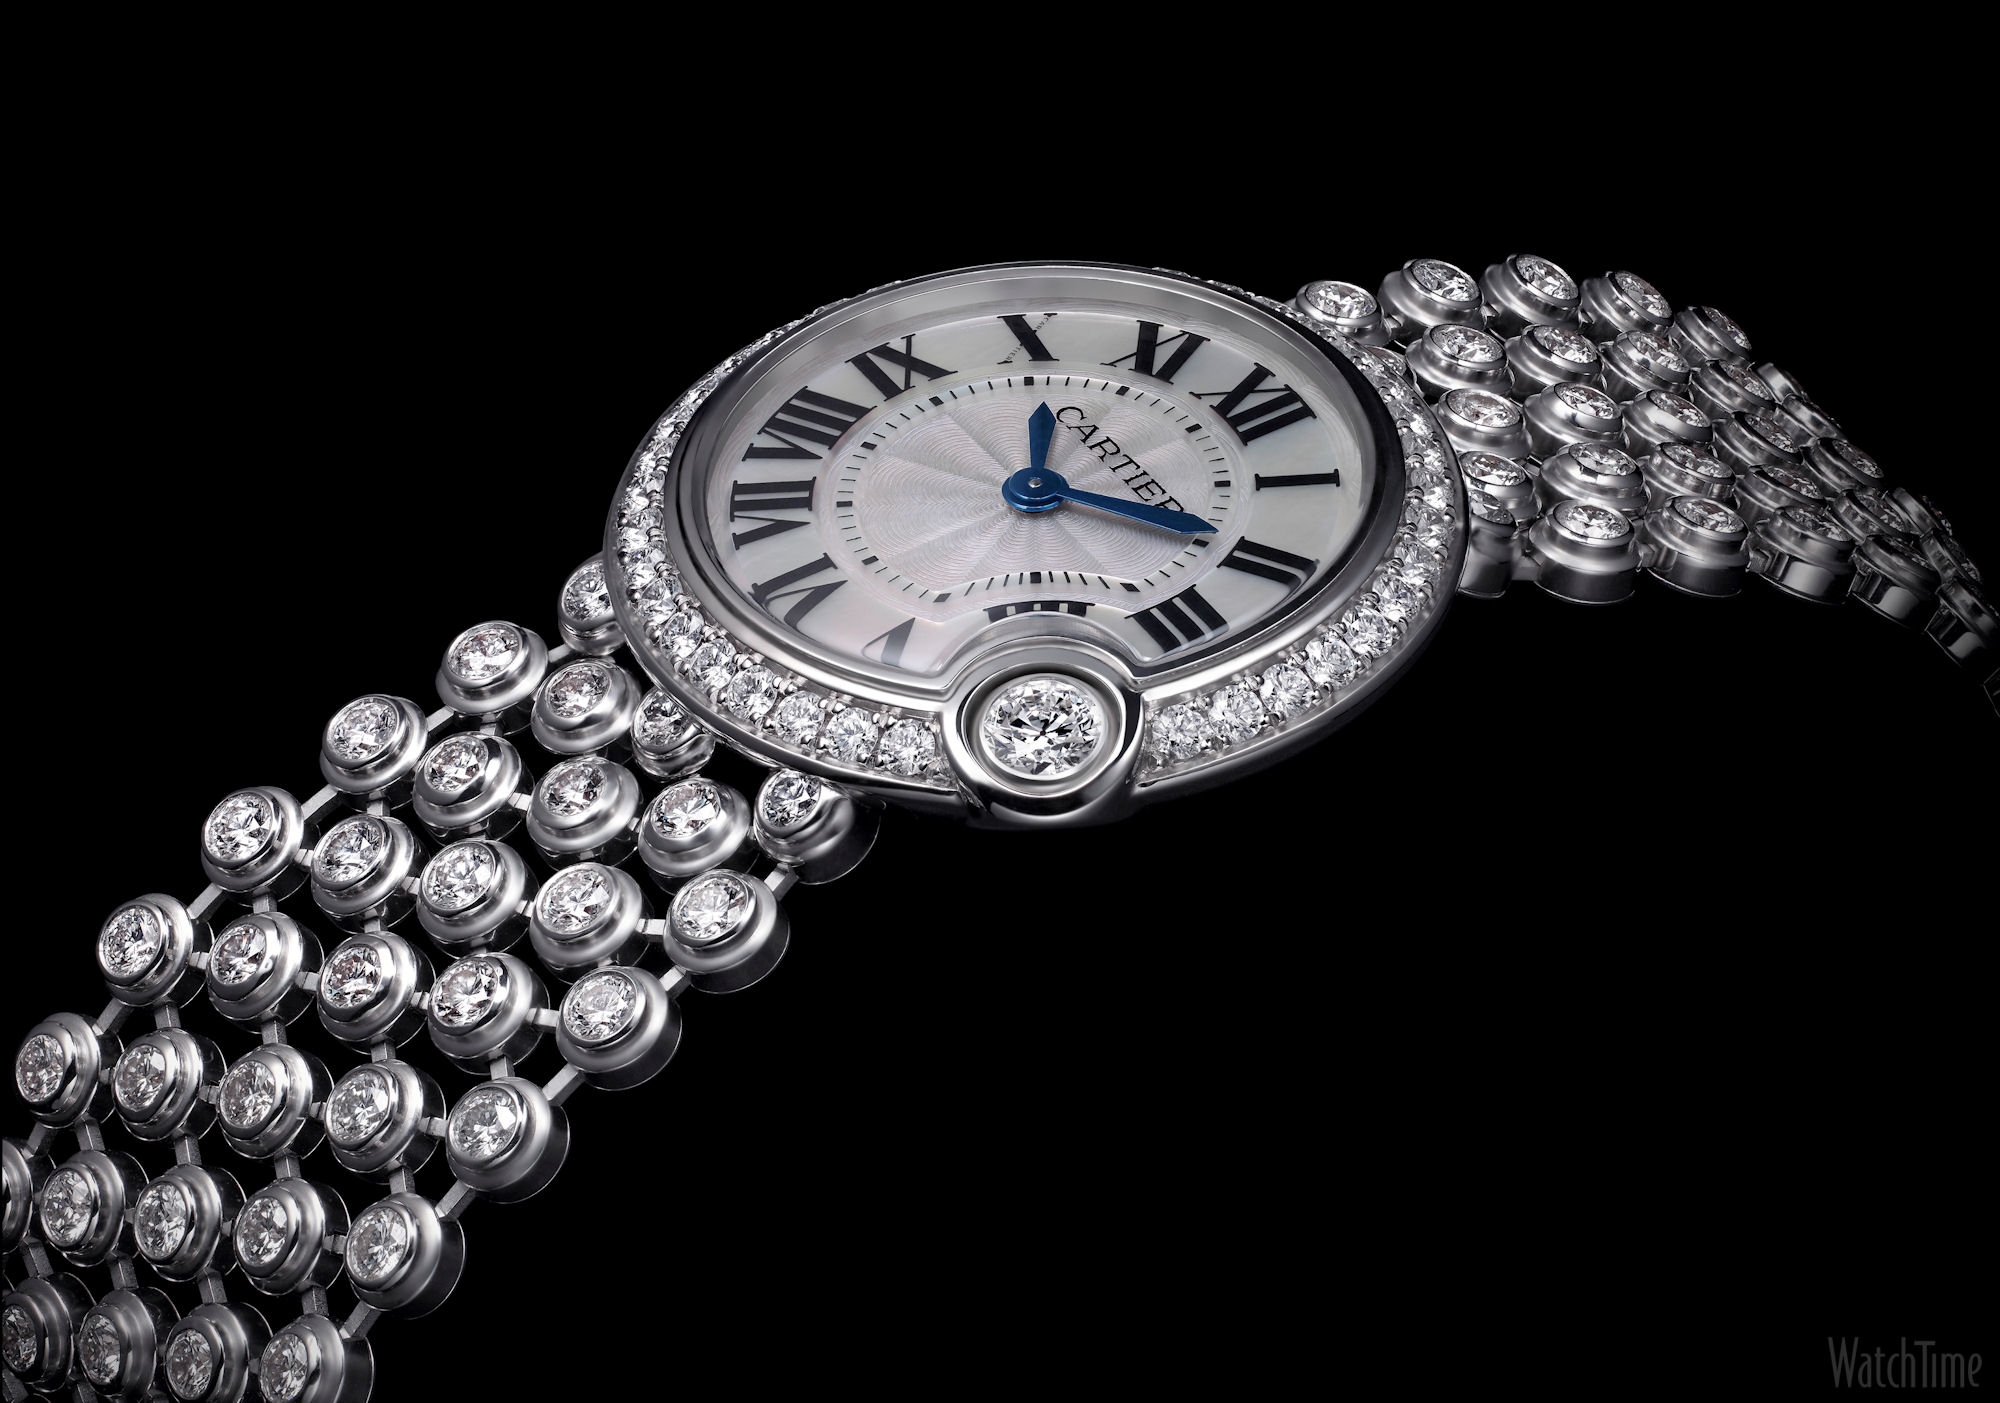 Watch Wallpaper 11 Cartier Watches From Sihh Watchtime Usa S No 1 Watch Magazine